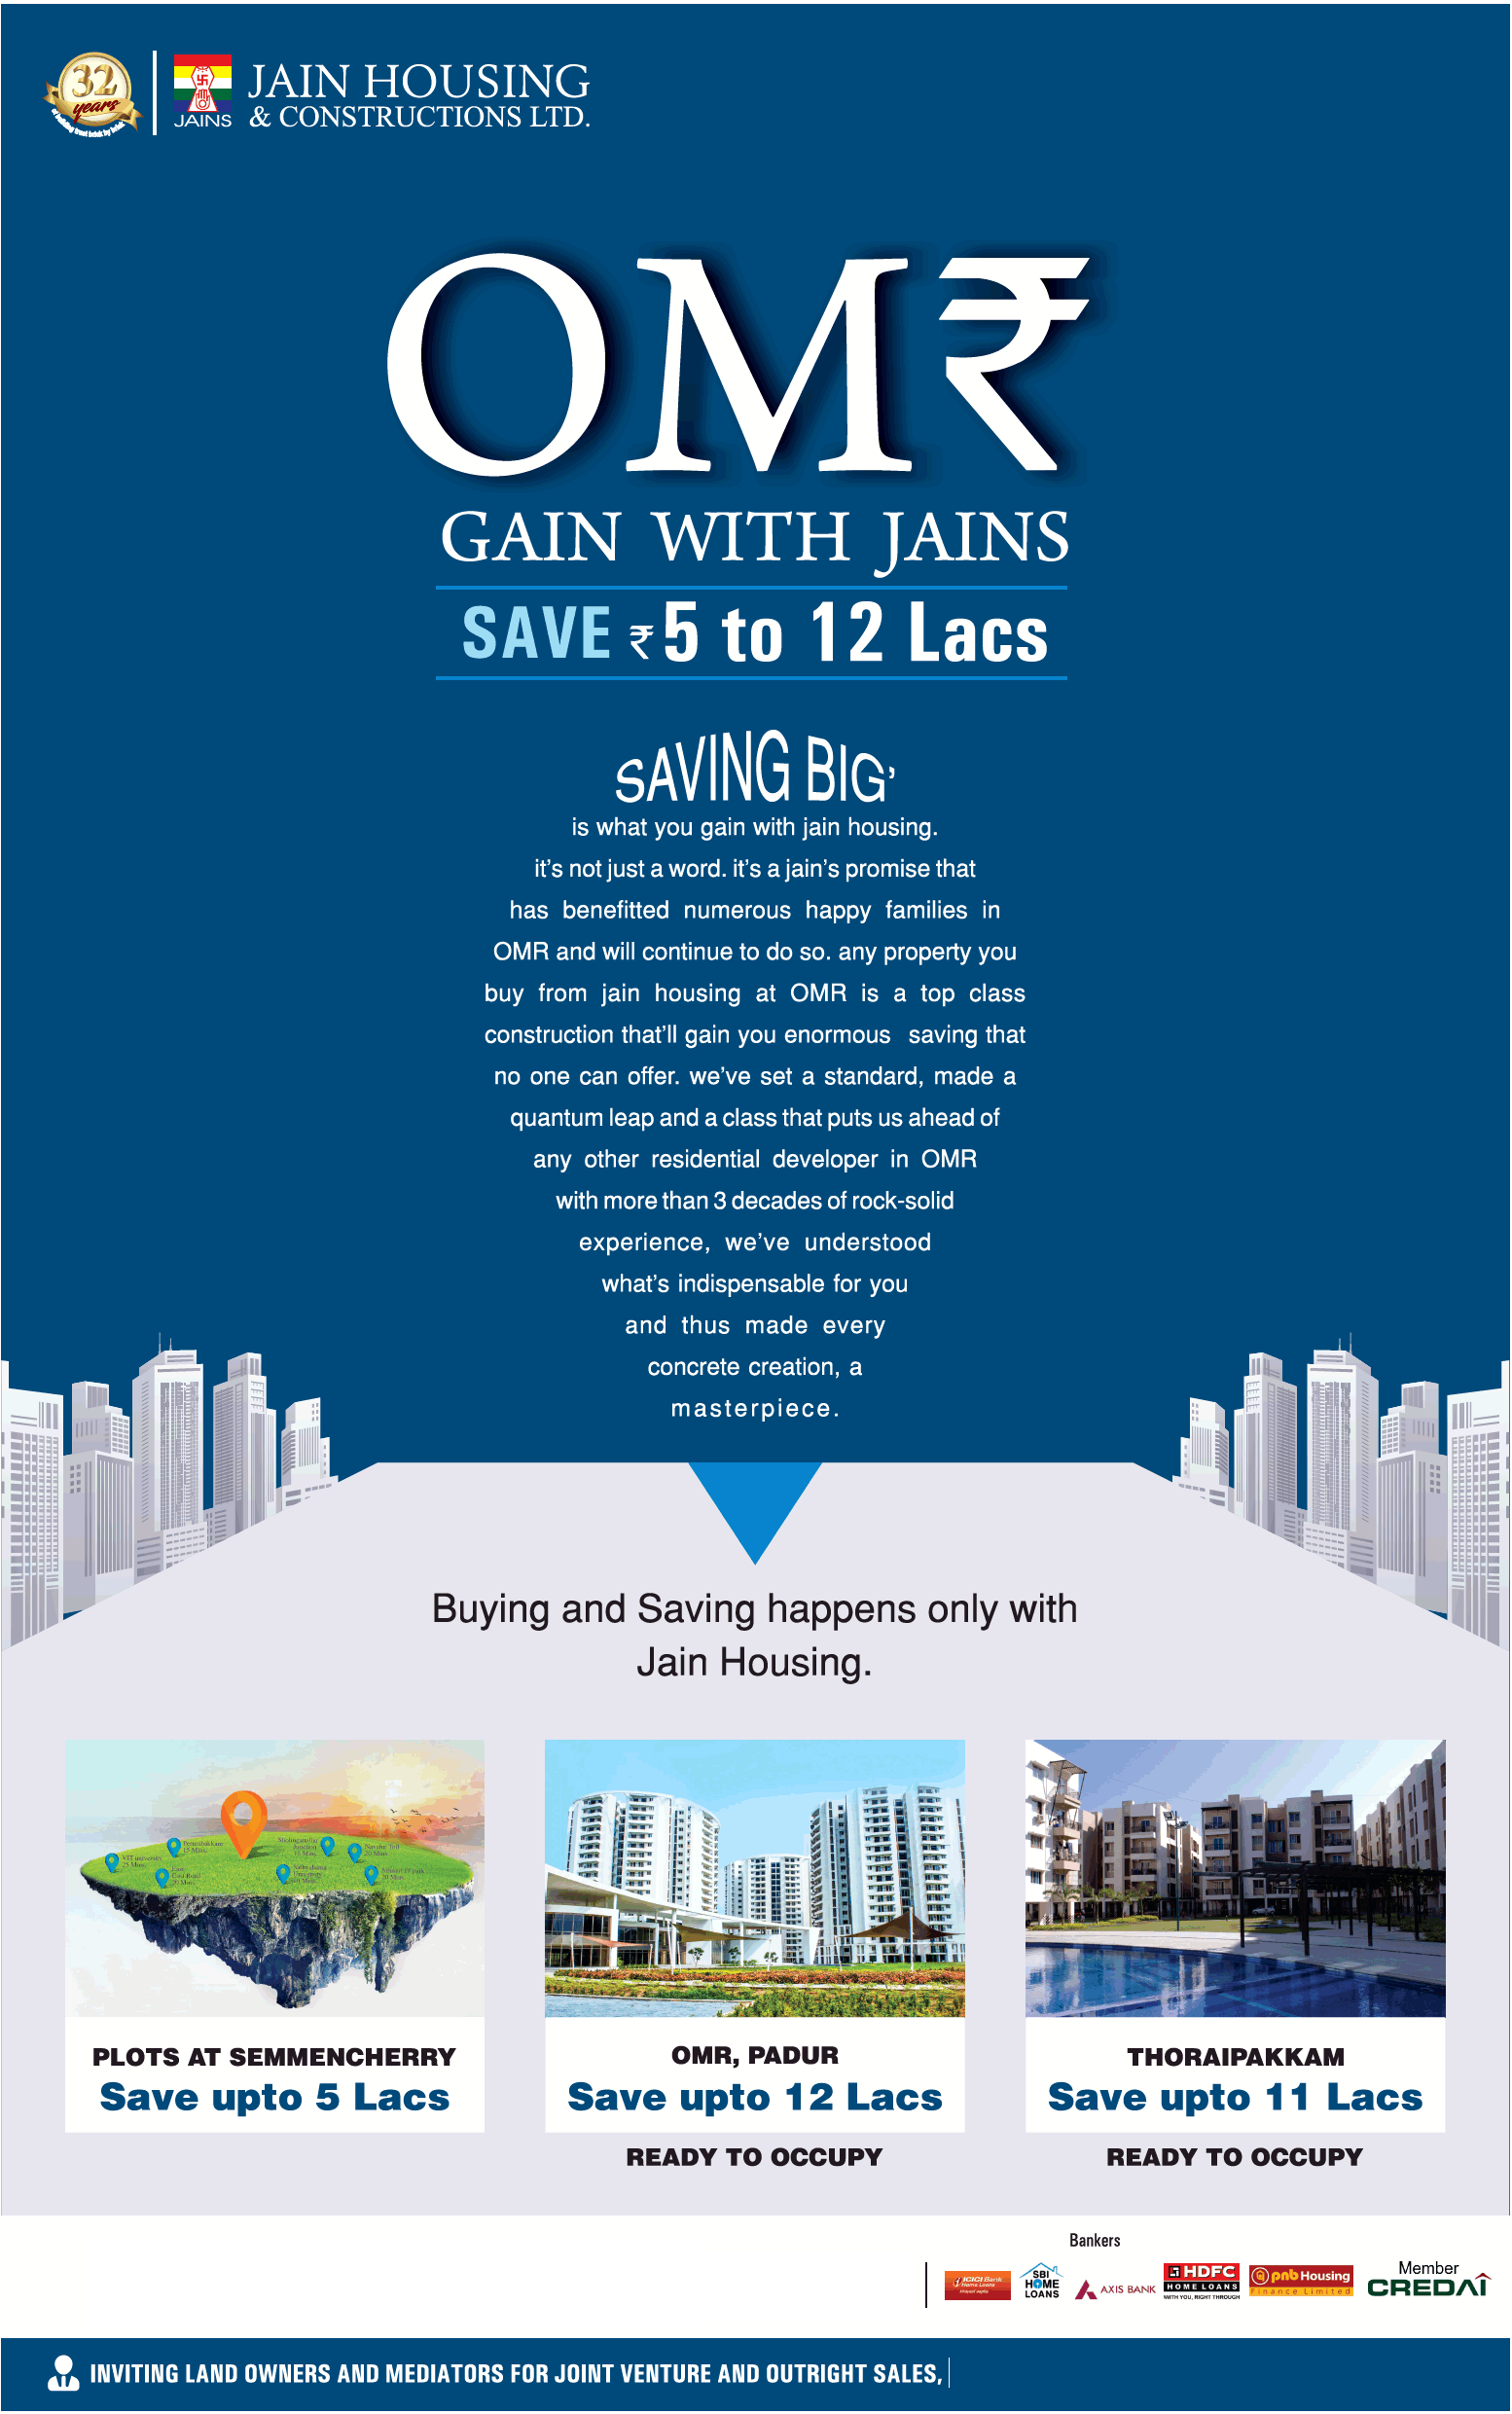 Buying and saving happens only with jain housing in Chennai Update